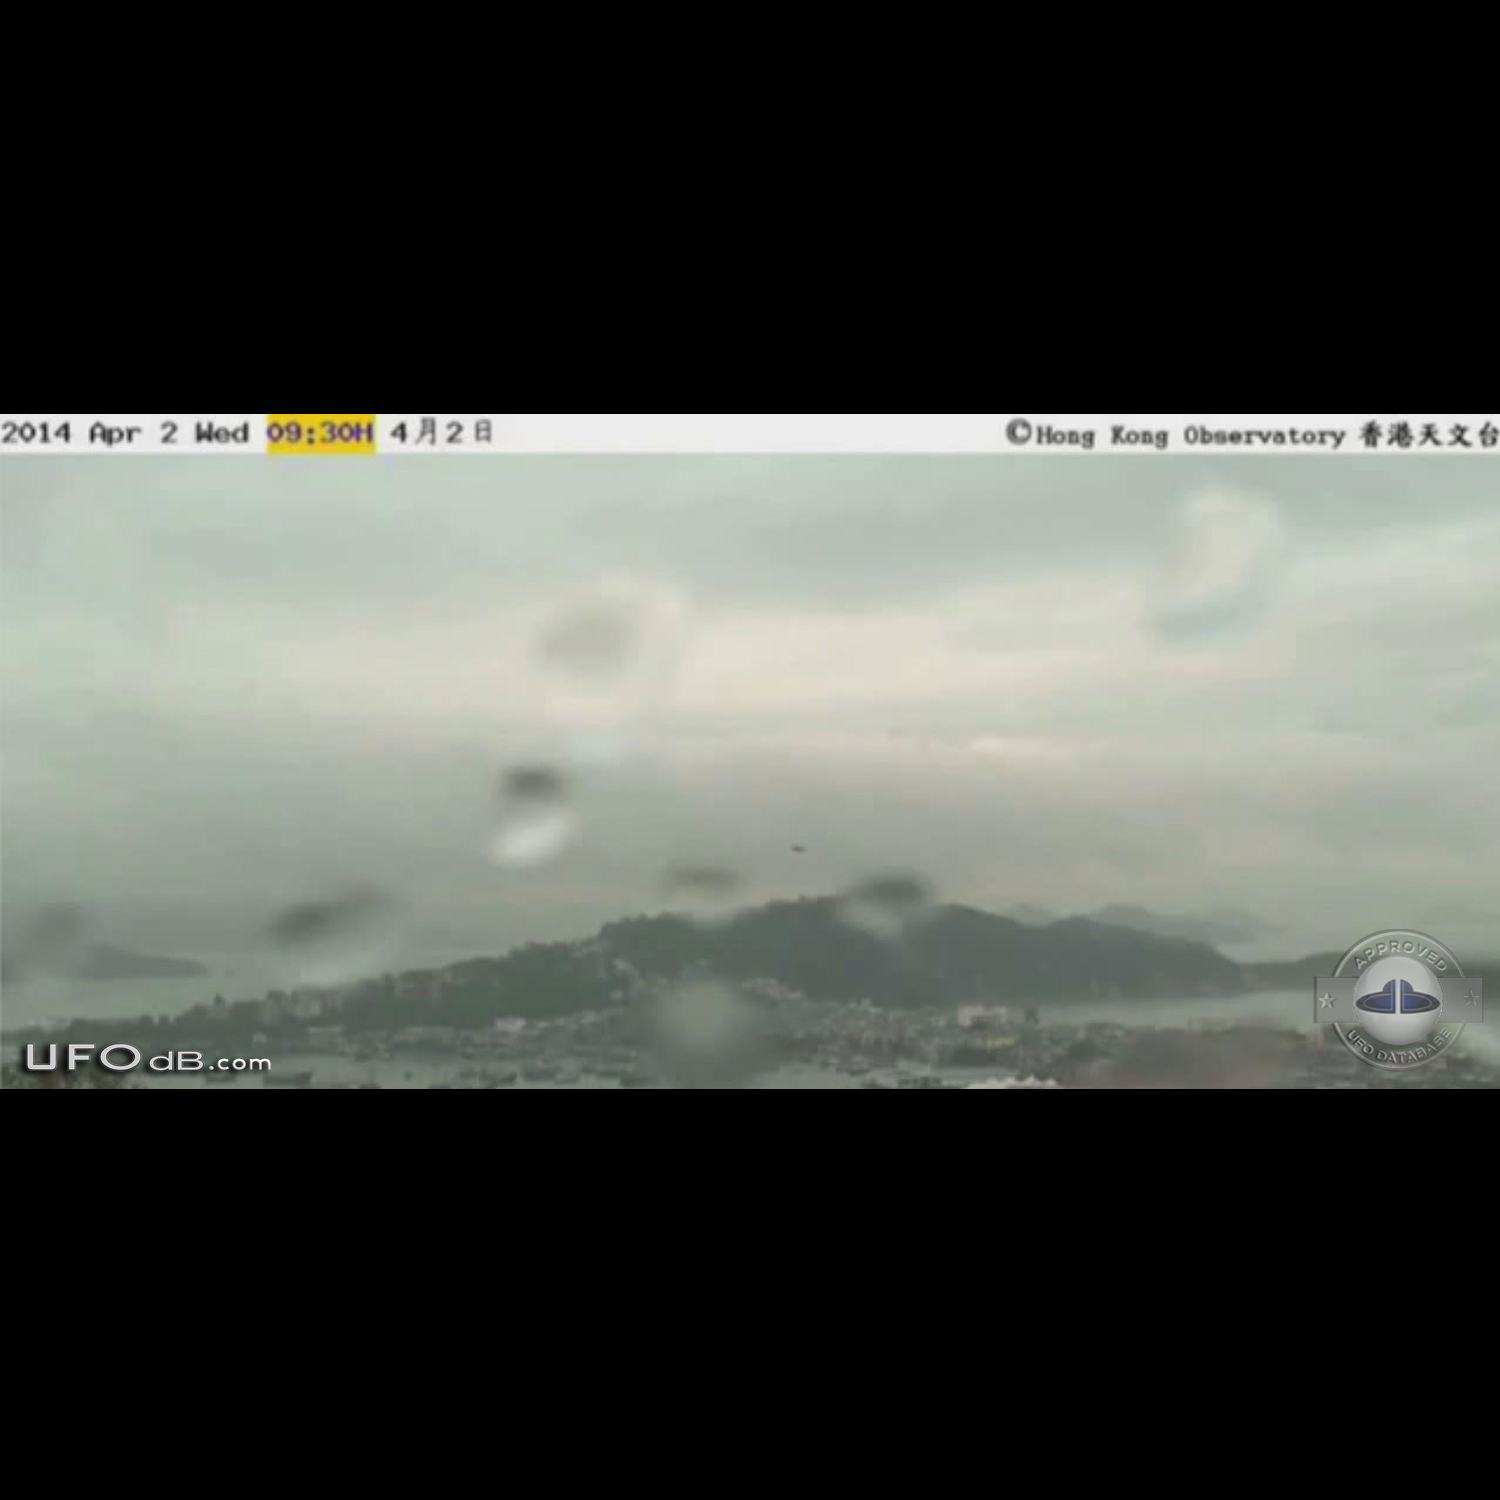 UFO caught on Picture by Hong Kong weather camera - April 2014 UFO Picture #567-2